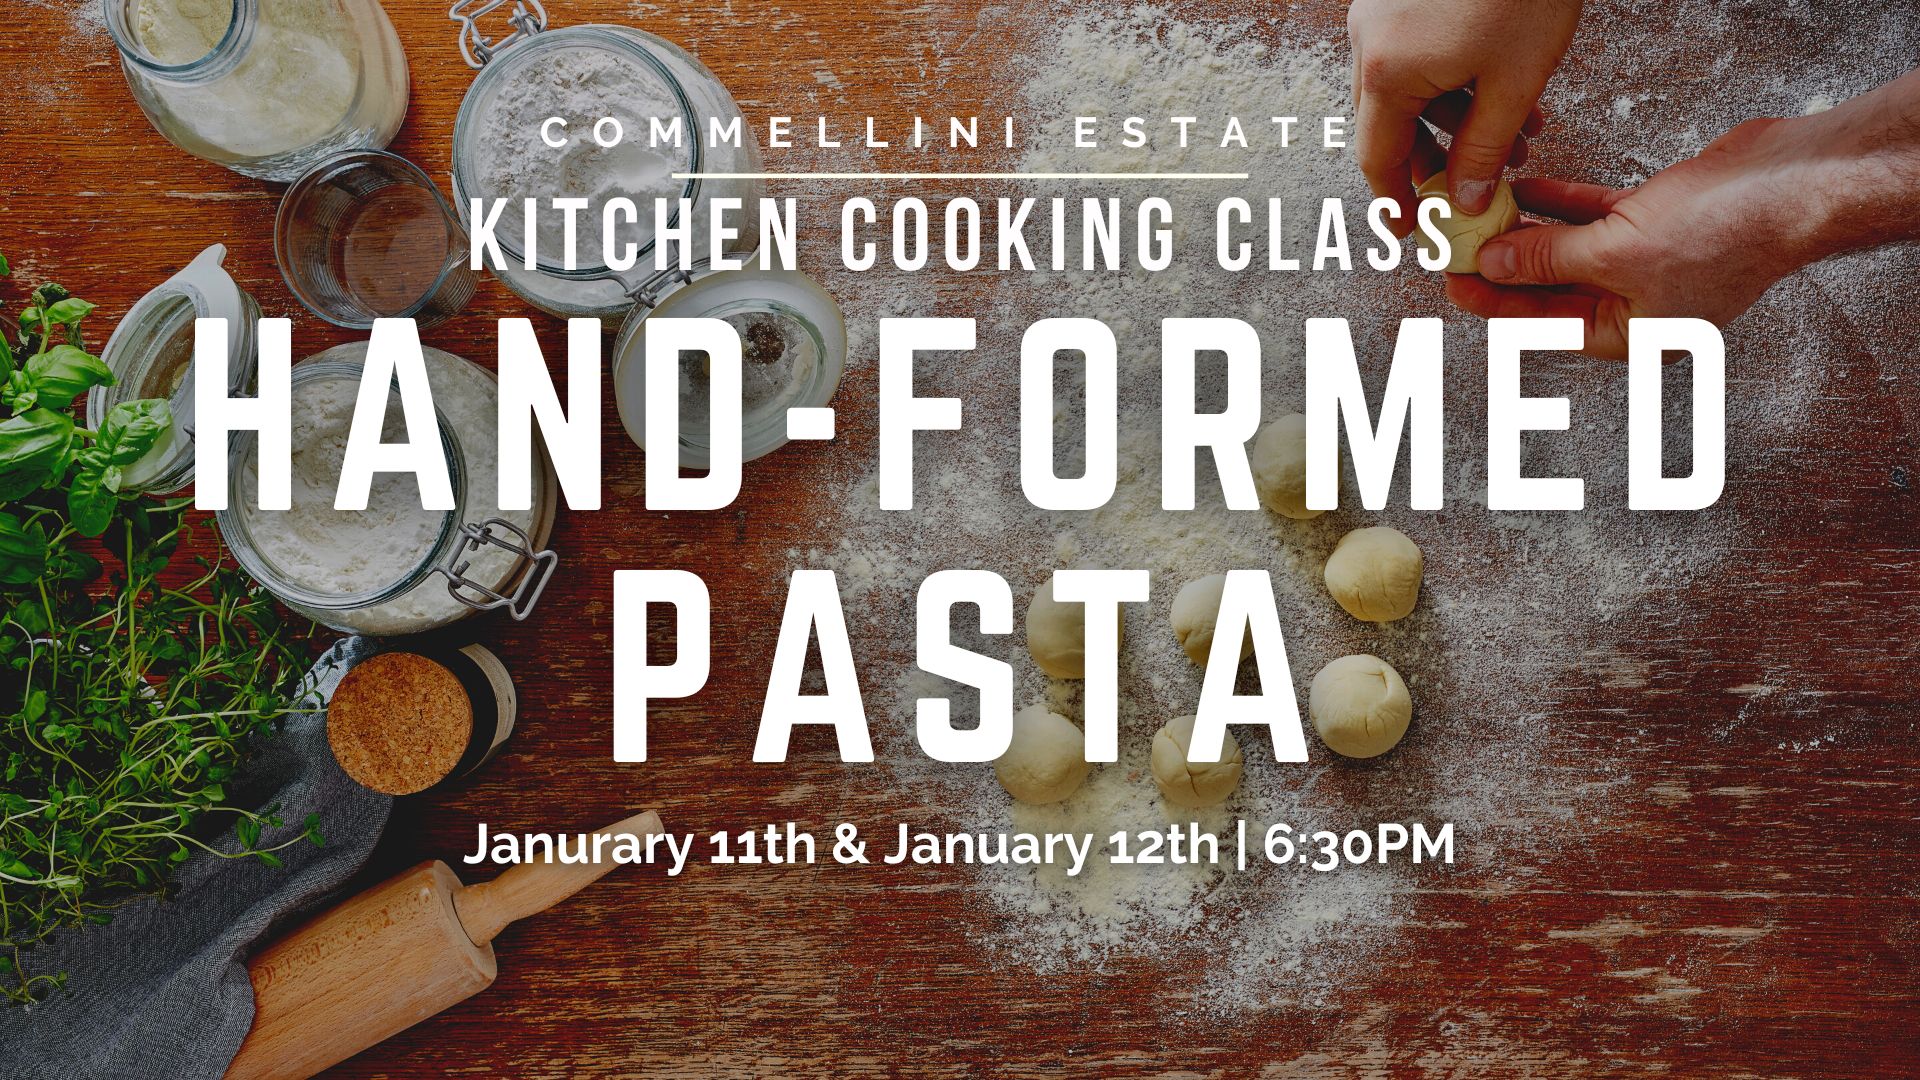 1.11 & 1.12 Kitchen Cooking Class: Hand-Formed Pasta